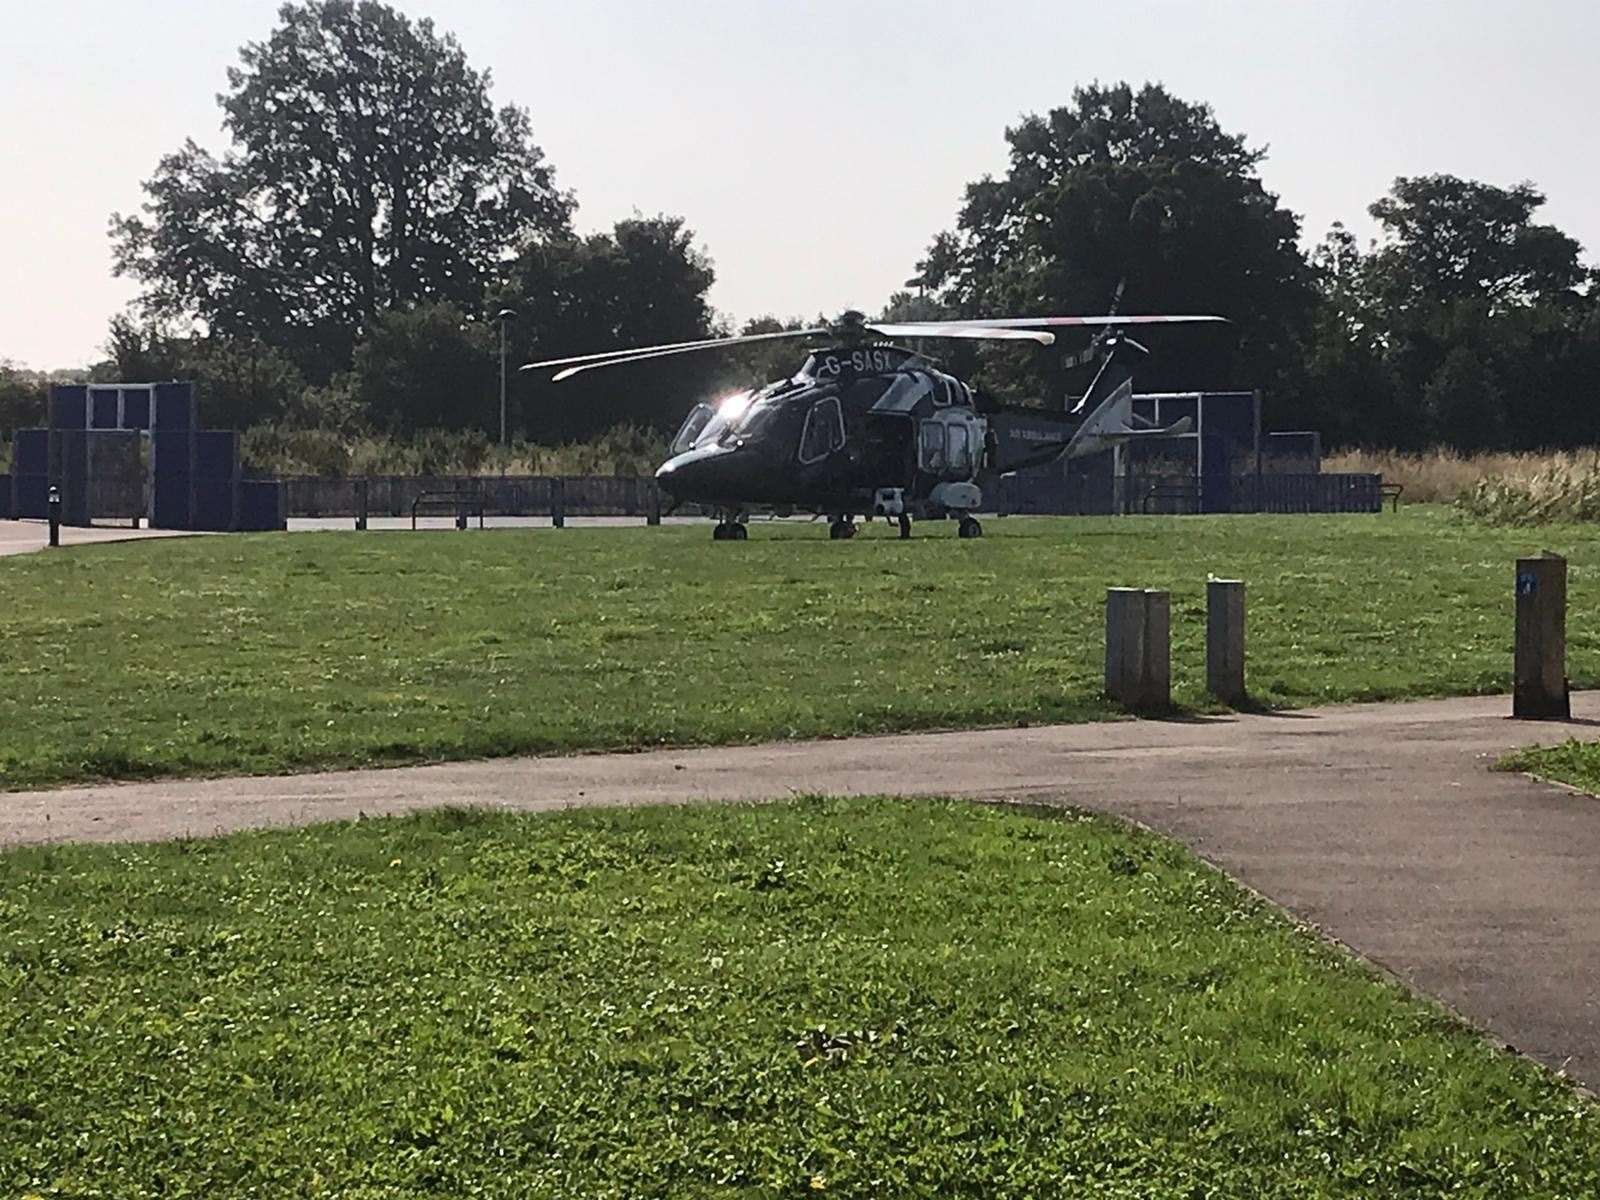 The air ambulance at the Eden Village estate this morning